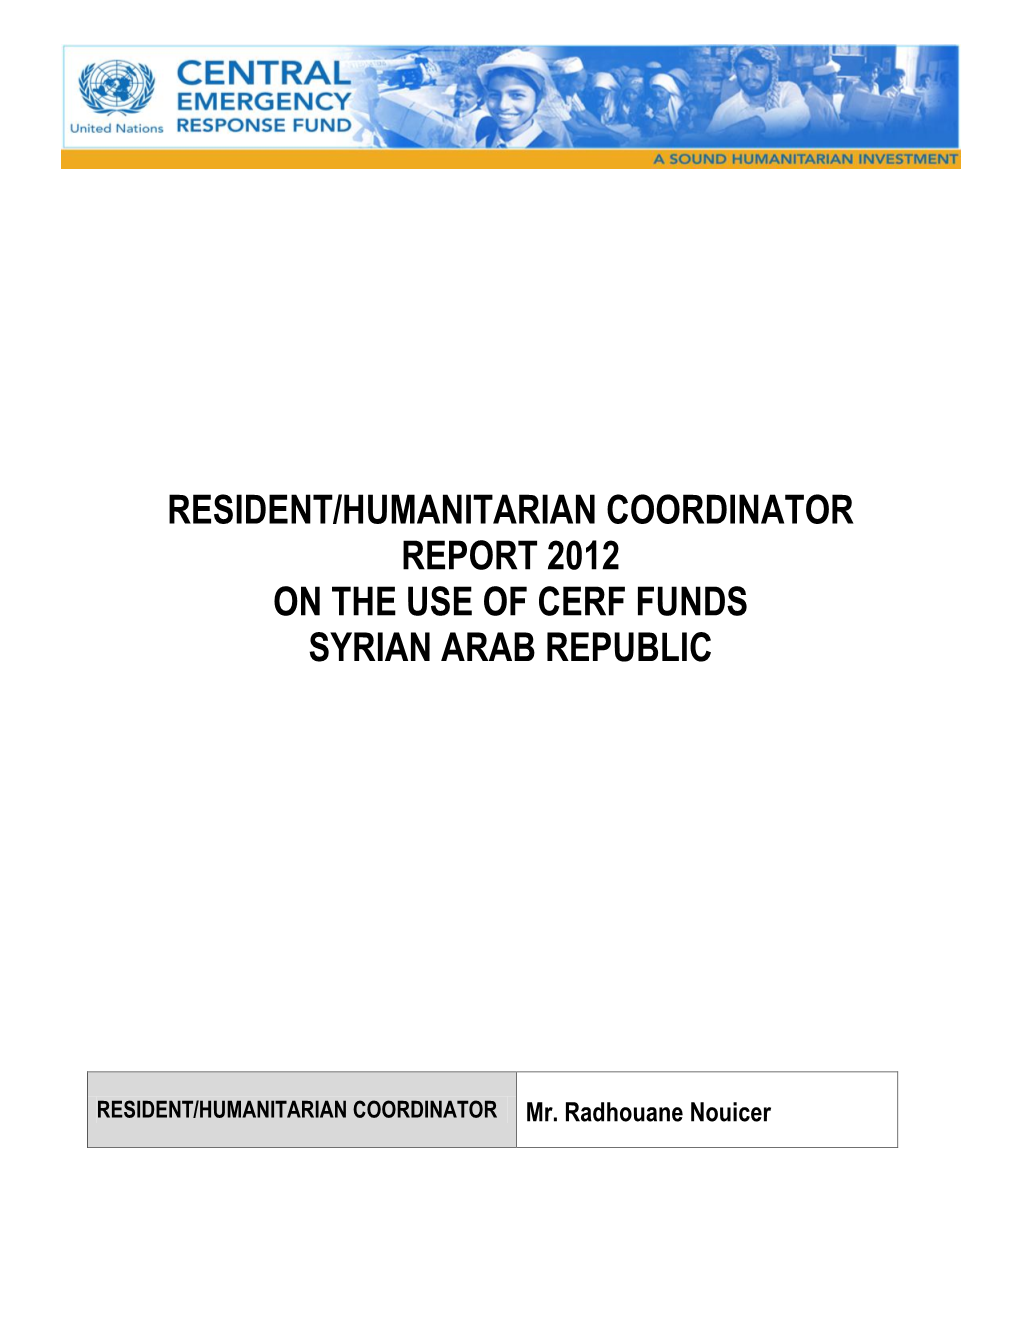 Resident/Humanitarian Coordinator Report 2012 on the Use of Cerf Funds Syrian Arab Republic